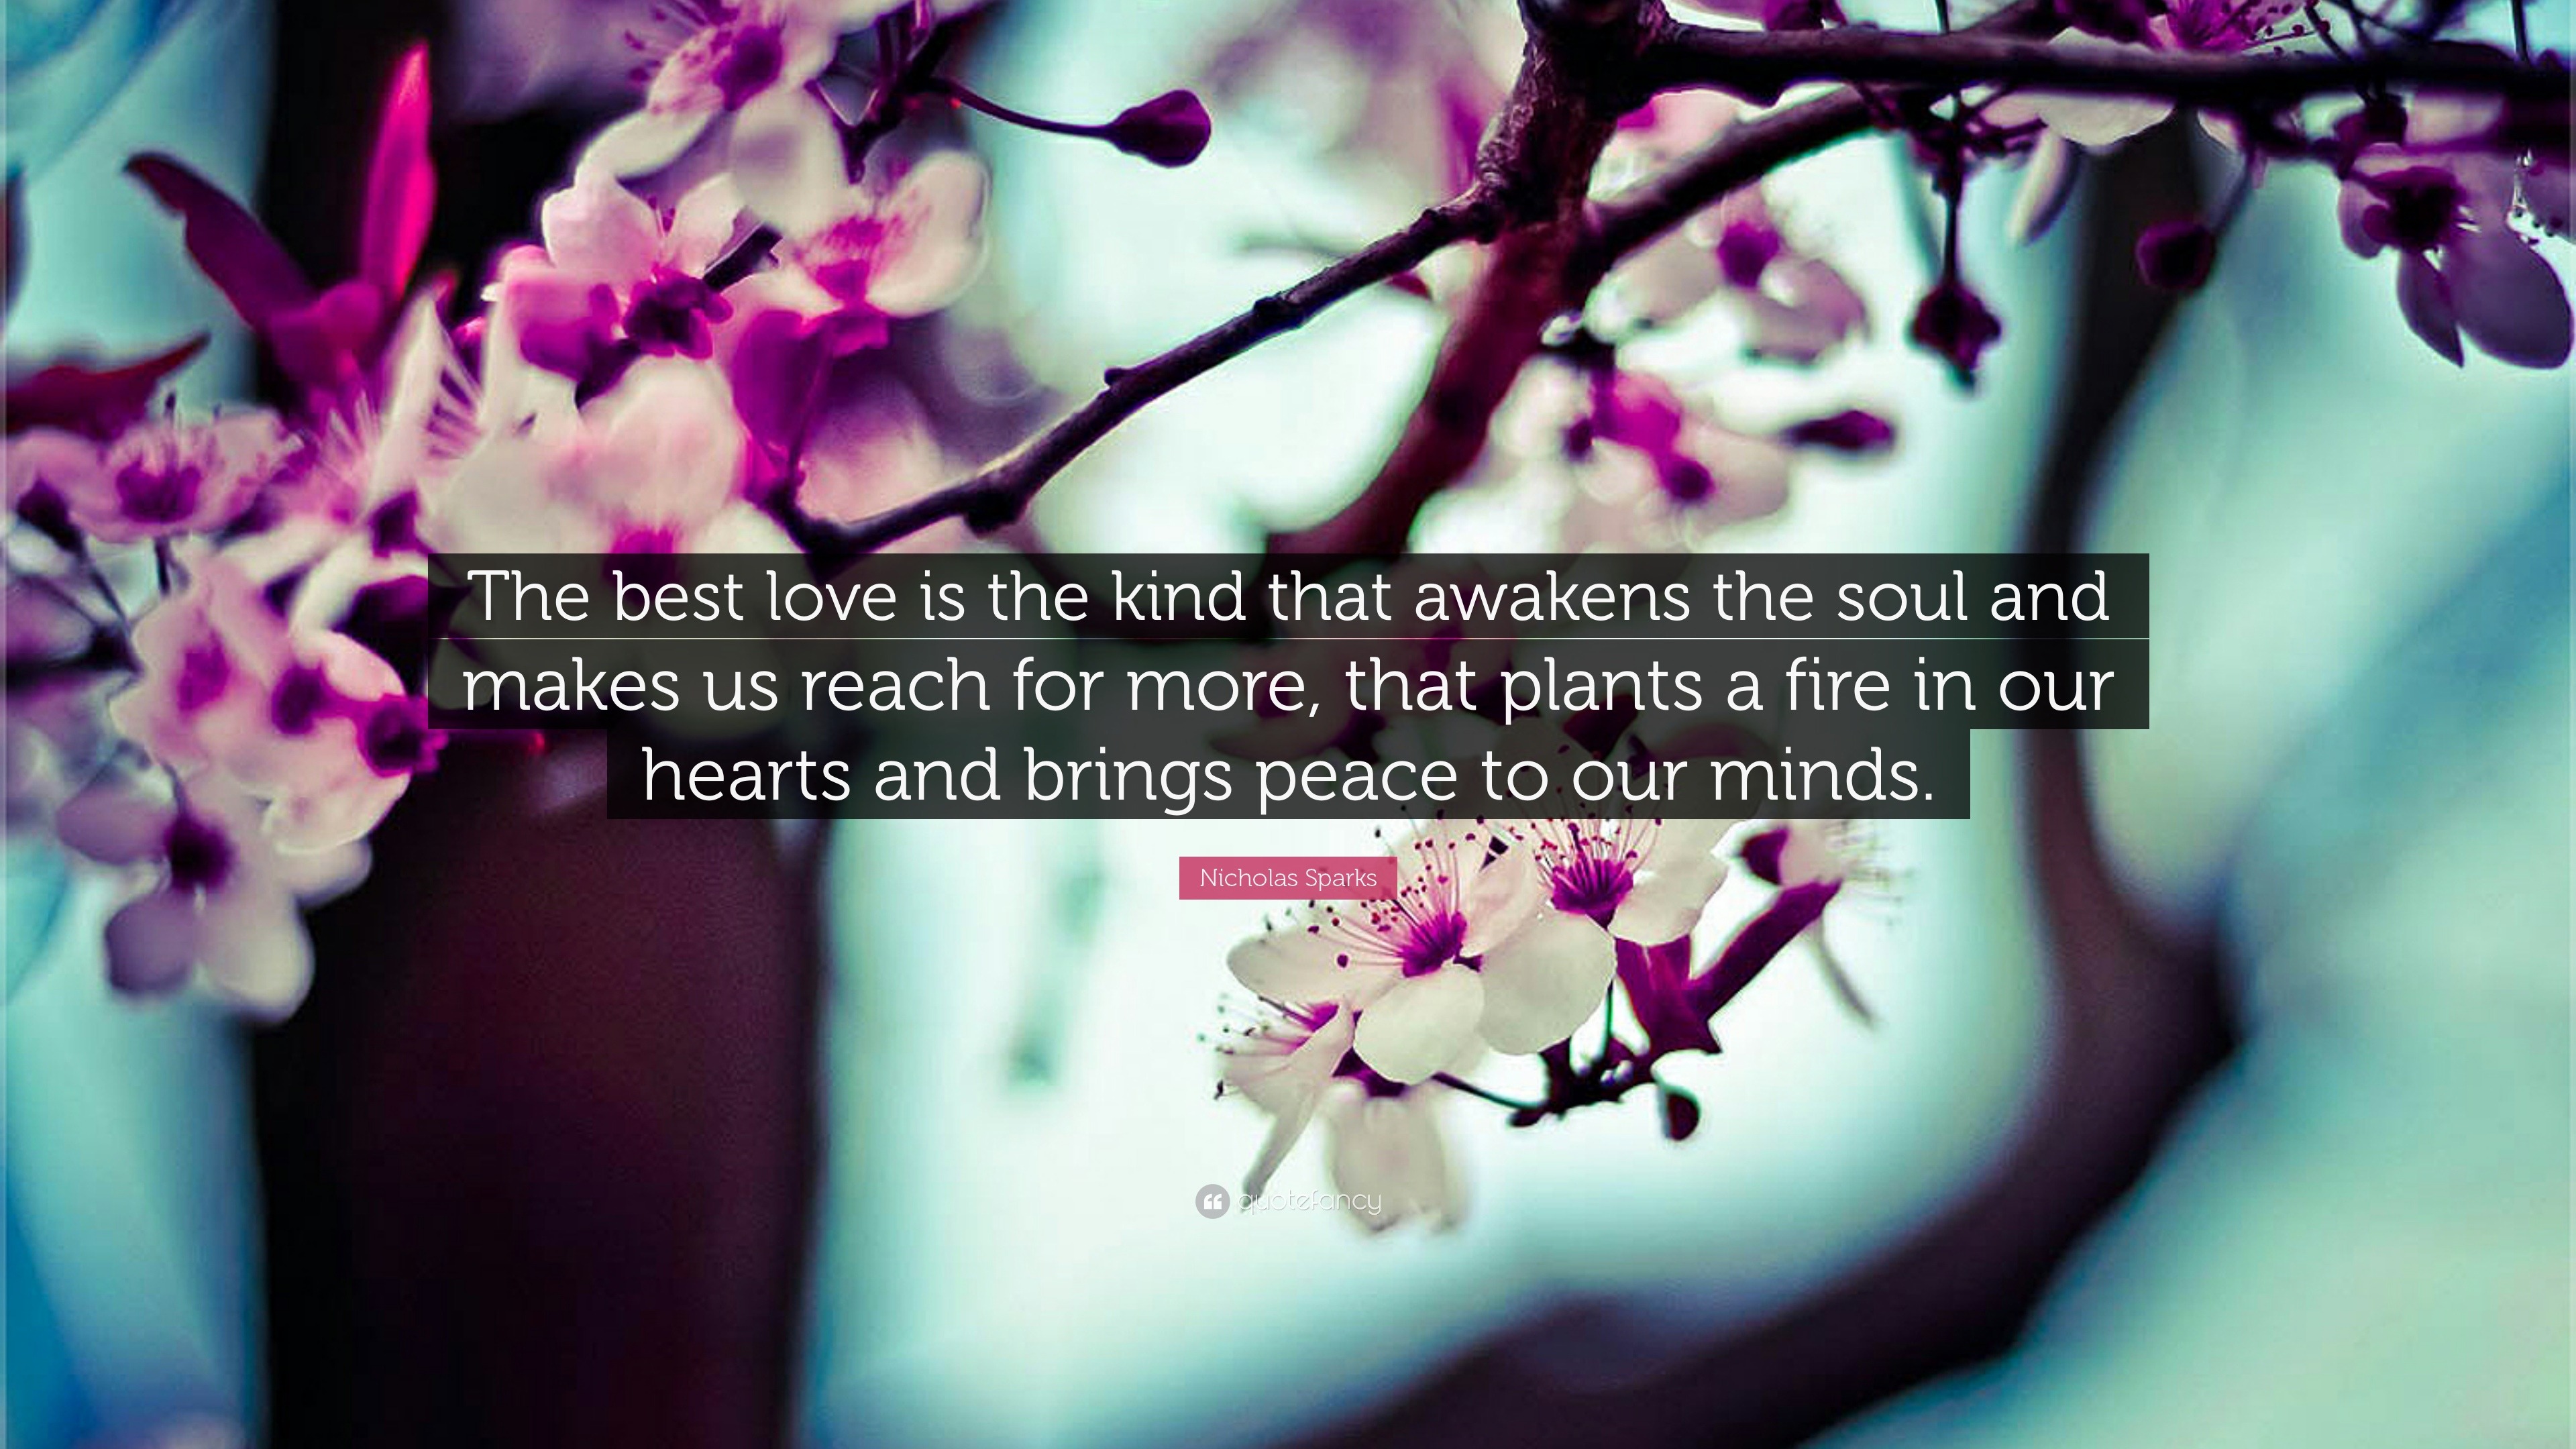 Nicholas Sparks Quote “The best love is the kind that awakens the soul and